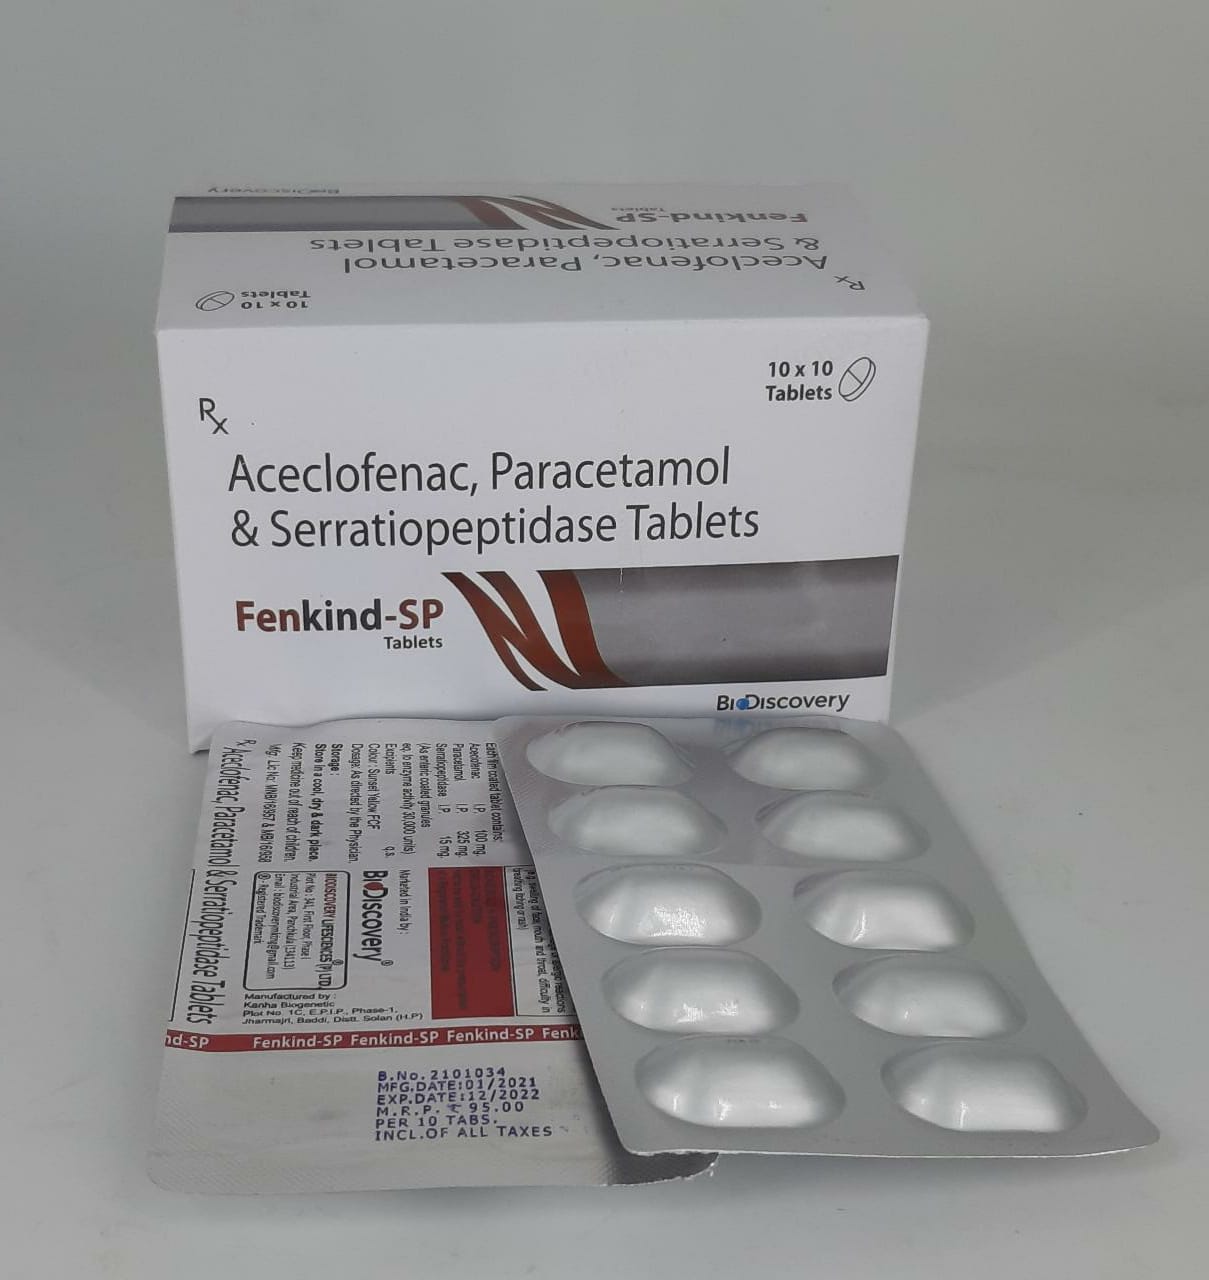 Product Name: Fenkind SP, Compositions of Fenkind SP are Aceclofenac, Paracetamol & Serratiopeptidase Tablets - Biodiscovery Lifesciences Pvt Ltd